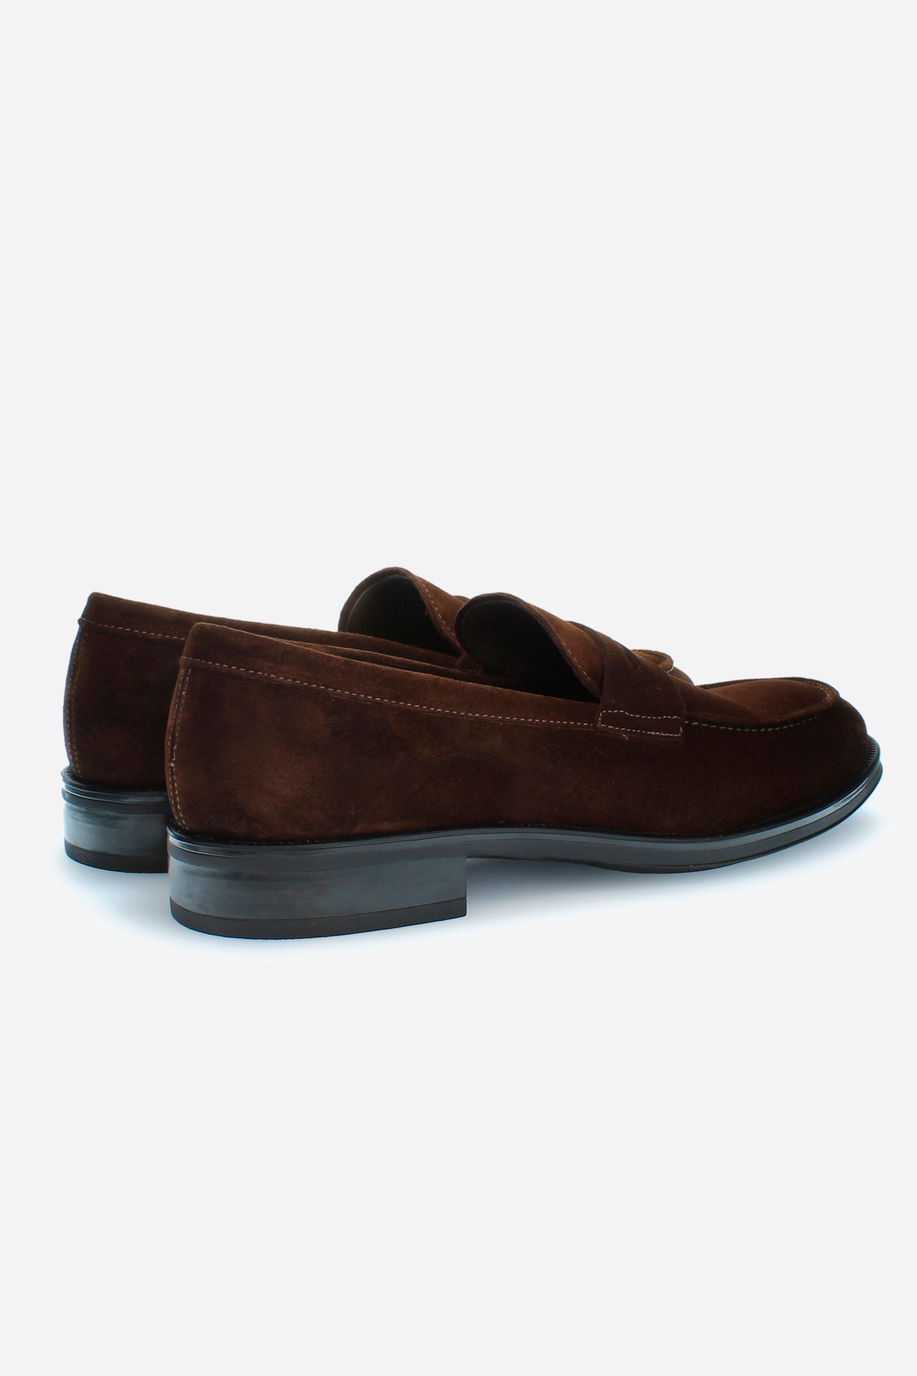 Men's college loafers in leather - Man shoes | La Martina - Official Online Shop